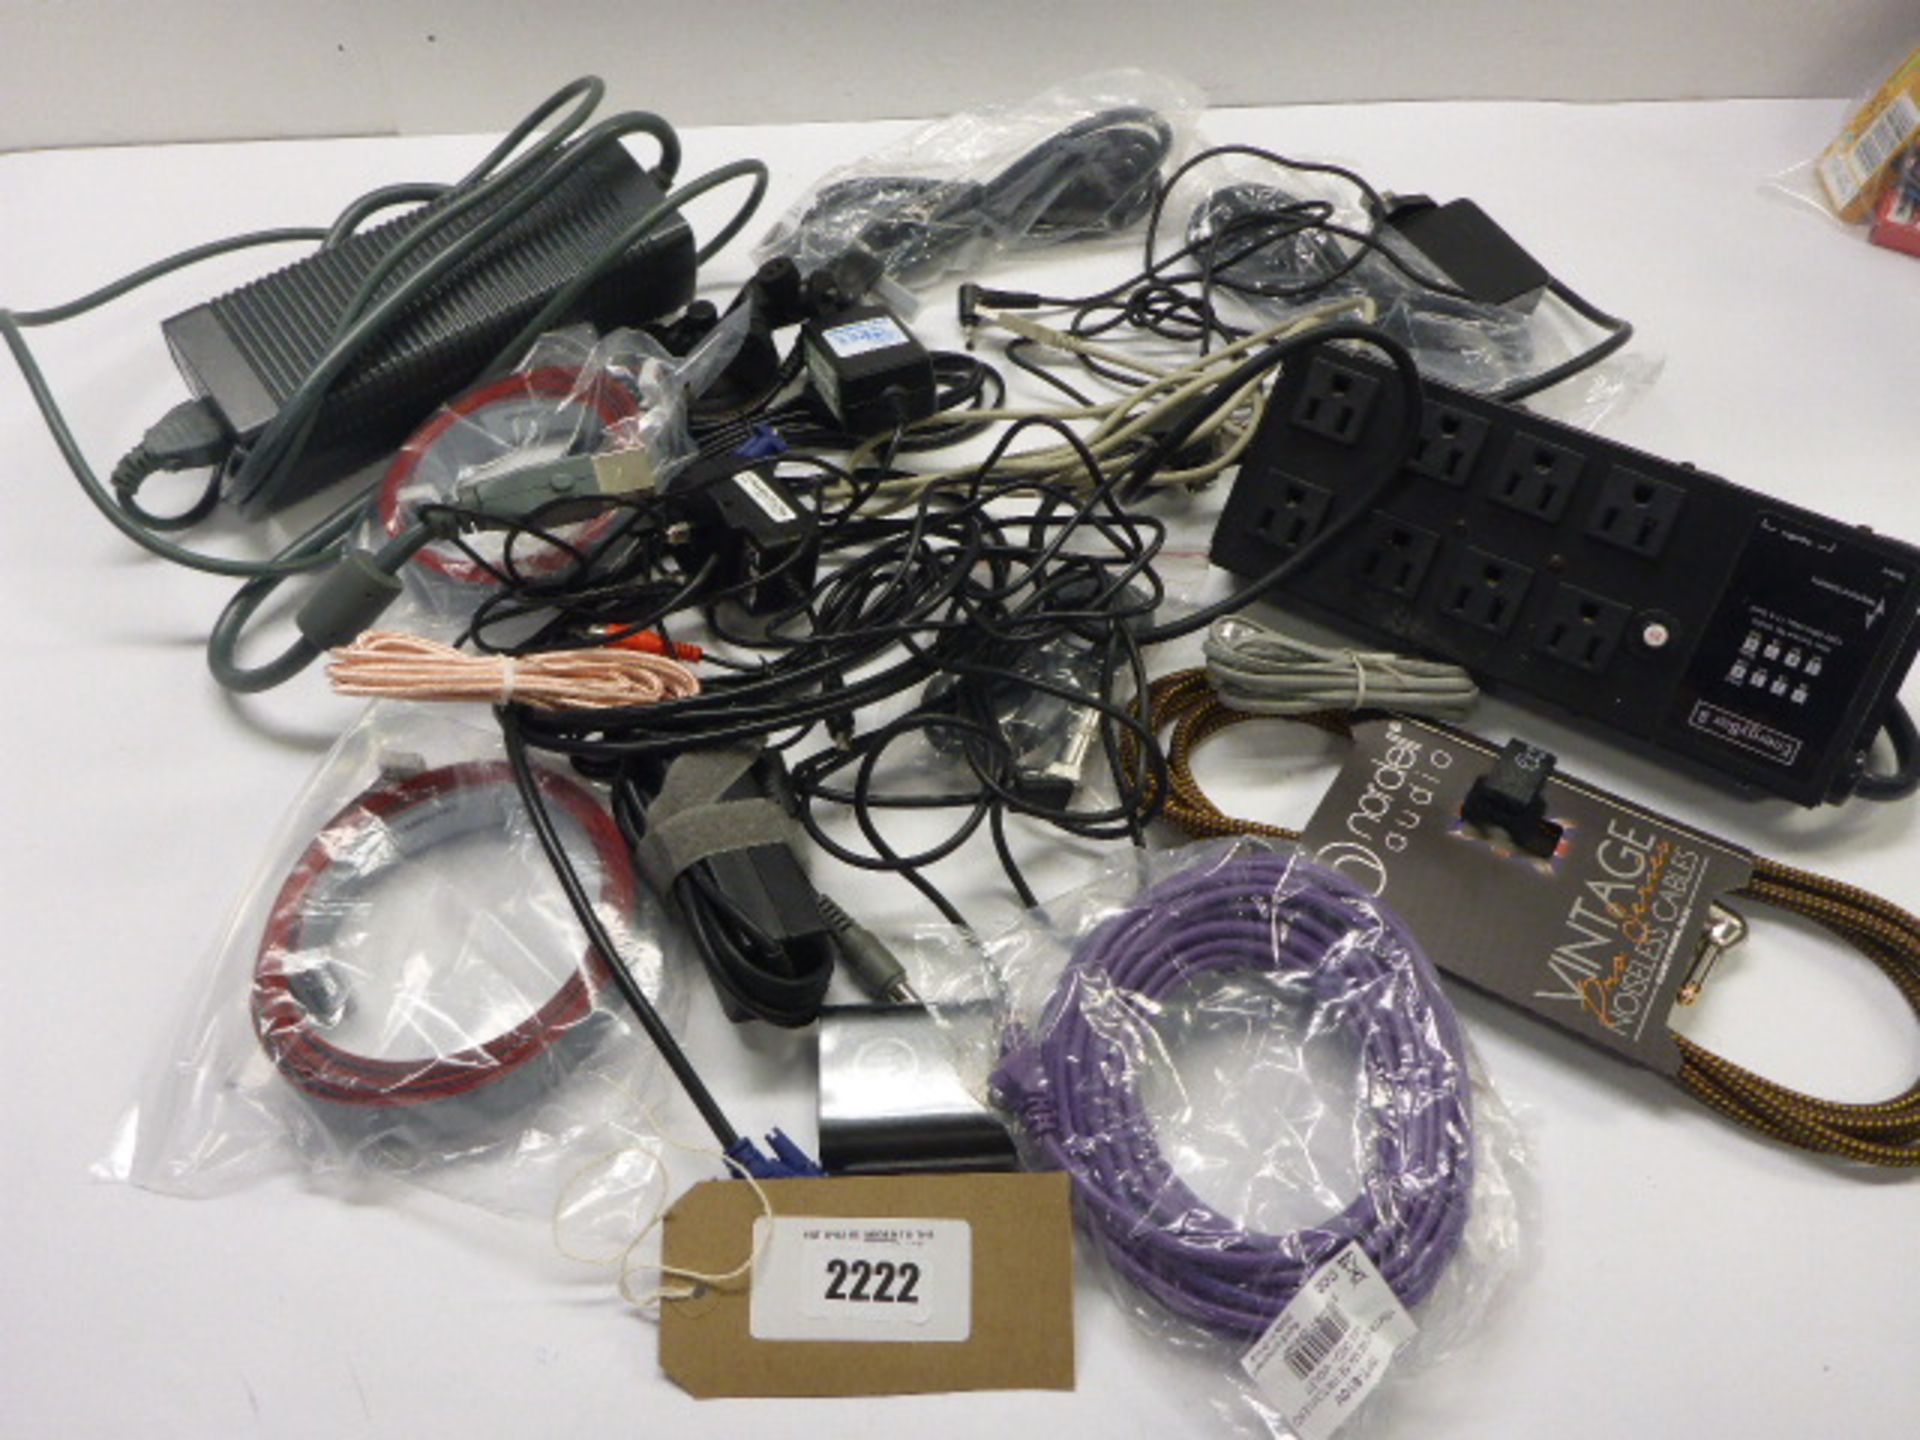 Bag containing quantity of various cabling and wires